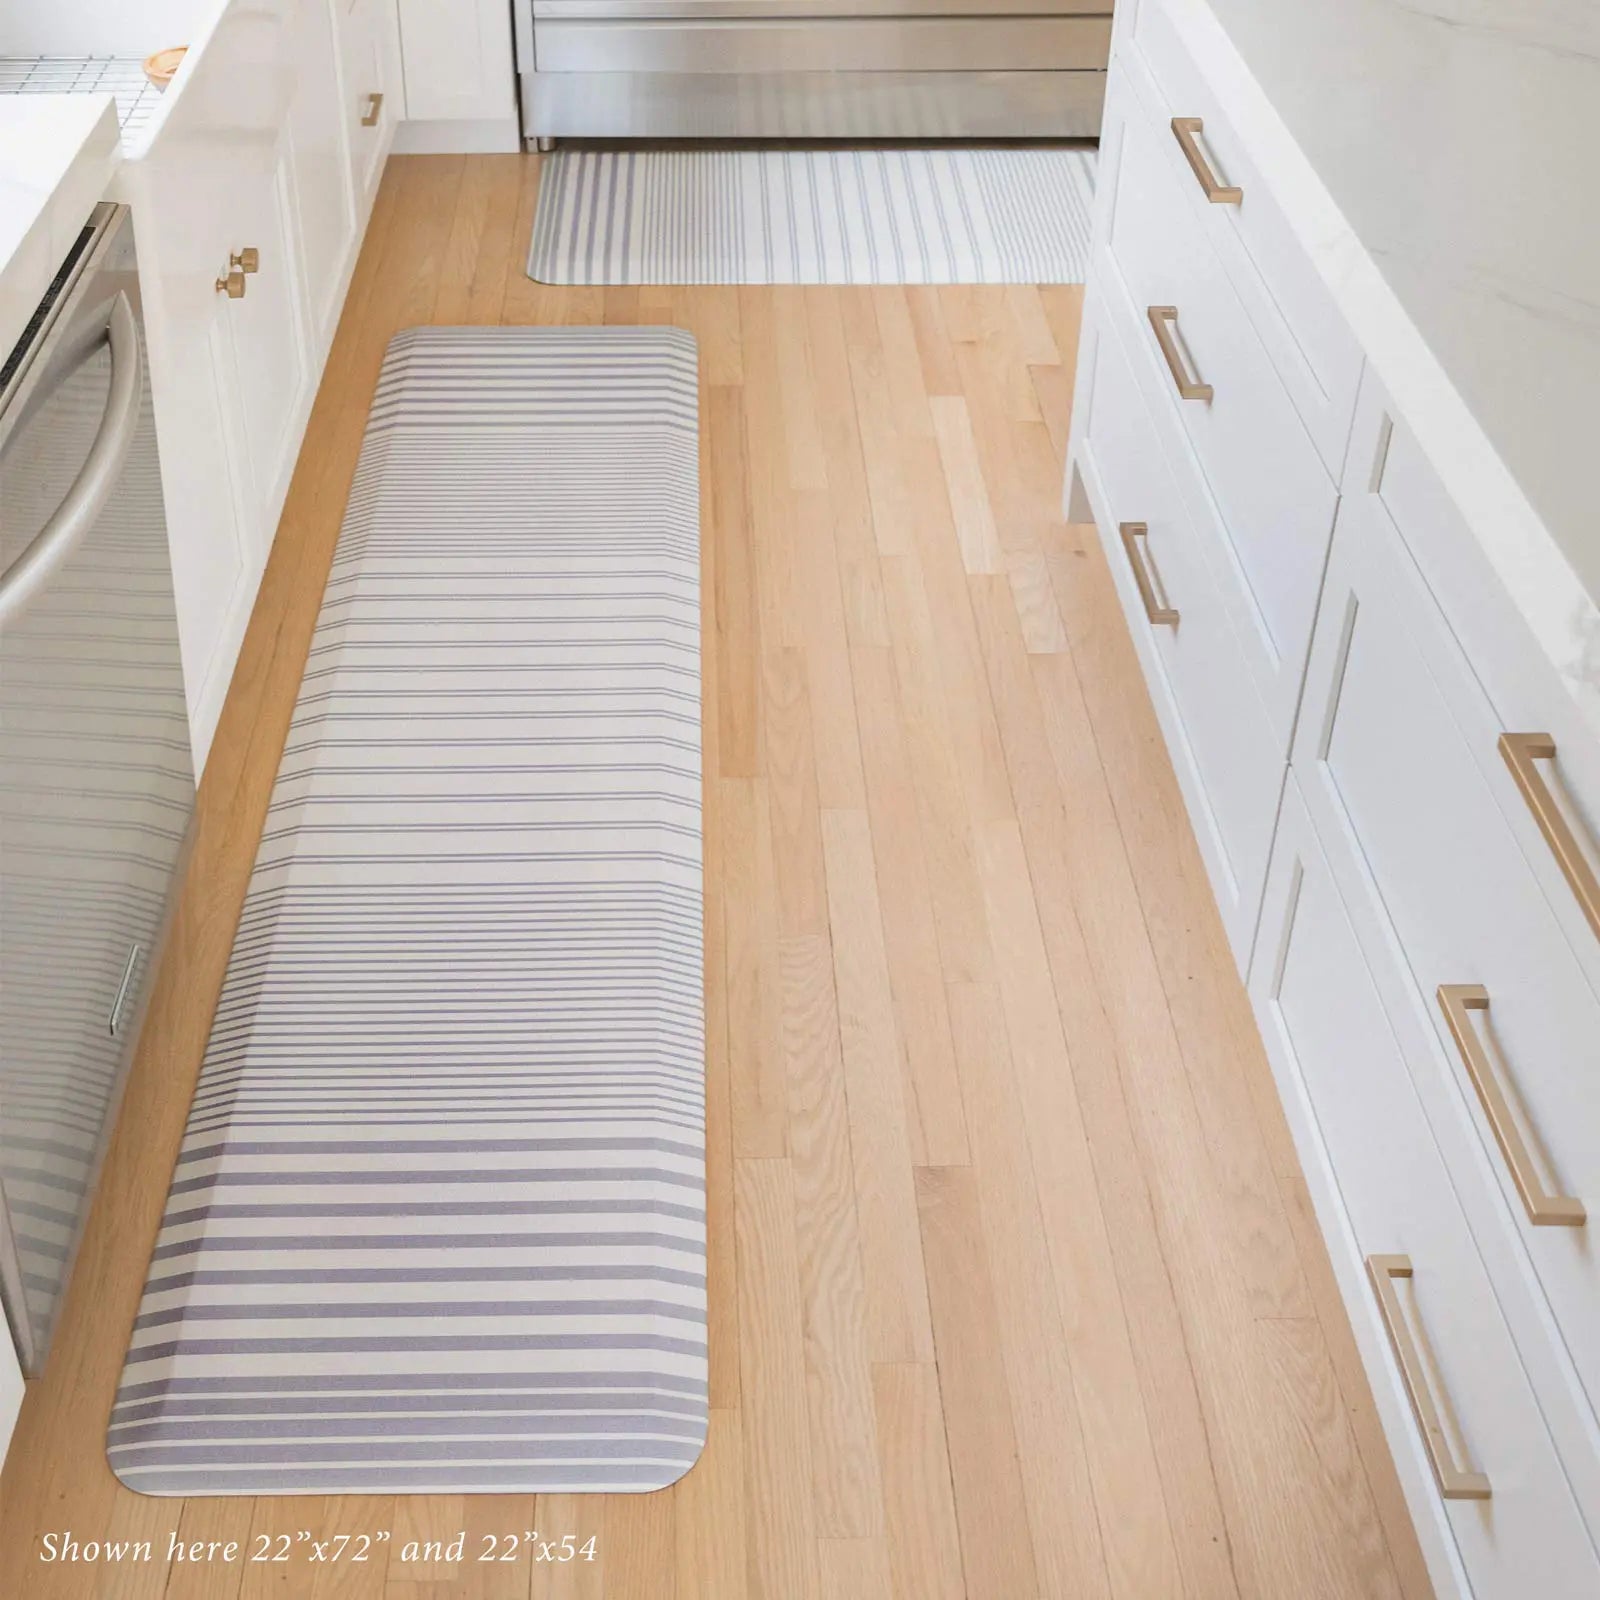 Nantucket Coastal Minimal Blue Ivory Stripe Standing Mat in kitchen in size 22x54 and 22x72